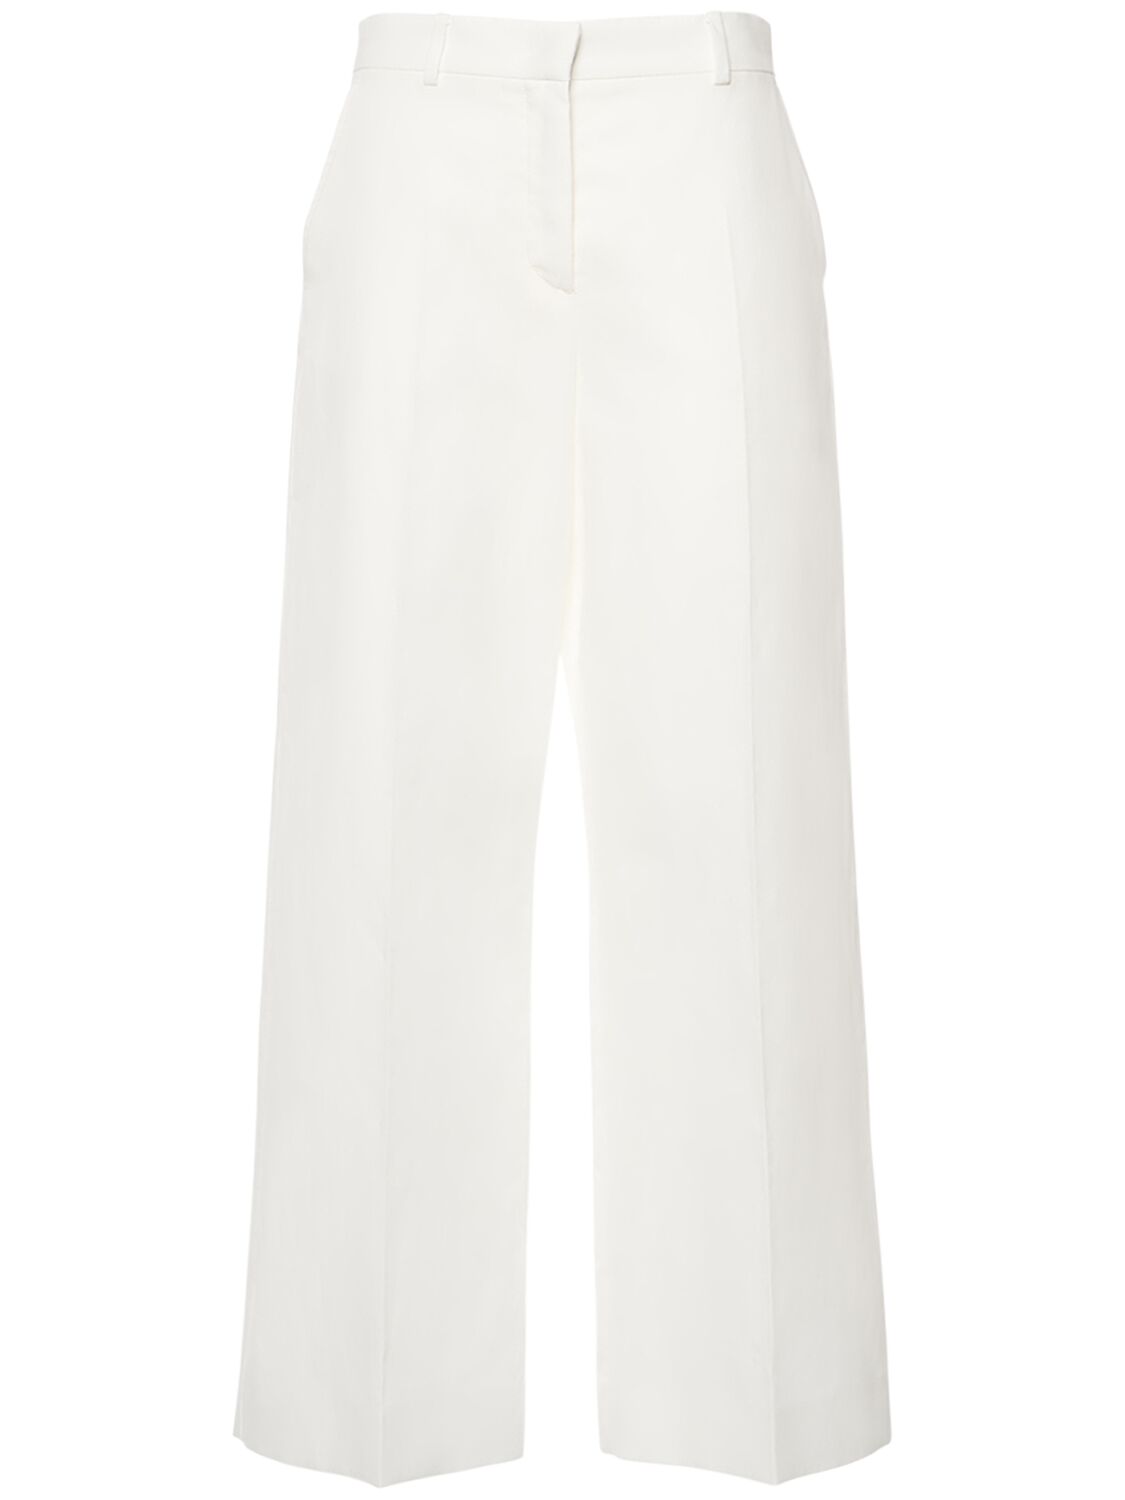 Weekend Max Mara Zircone Cotton & Linen Canvas Wide Trousers In Ivory